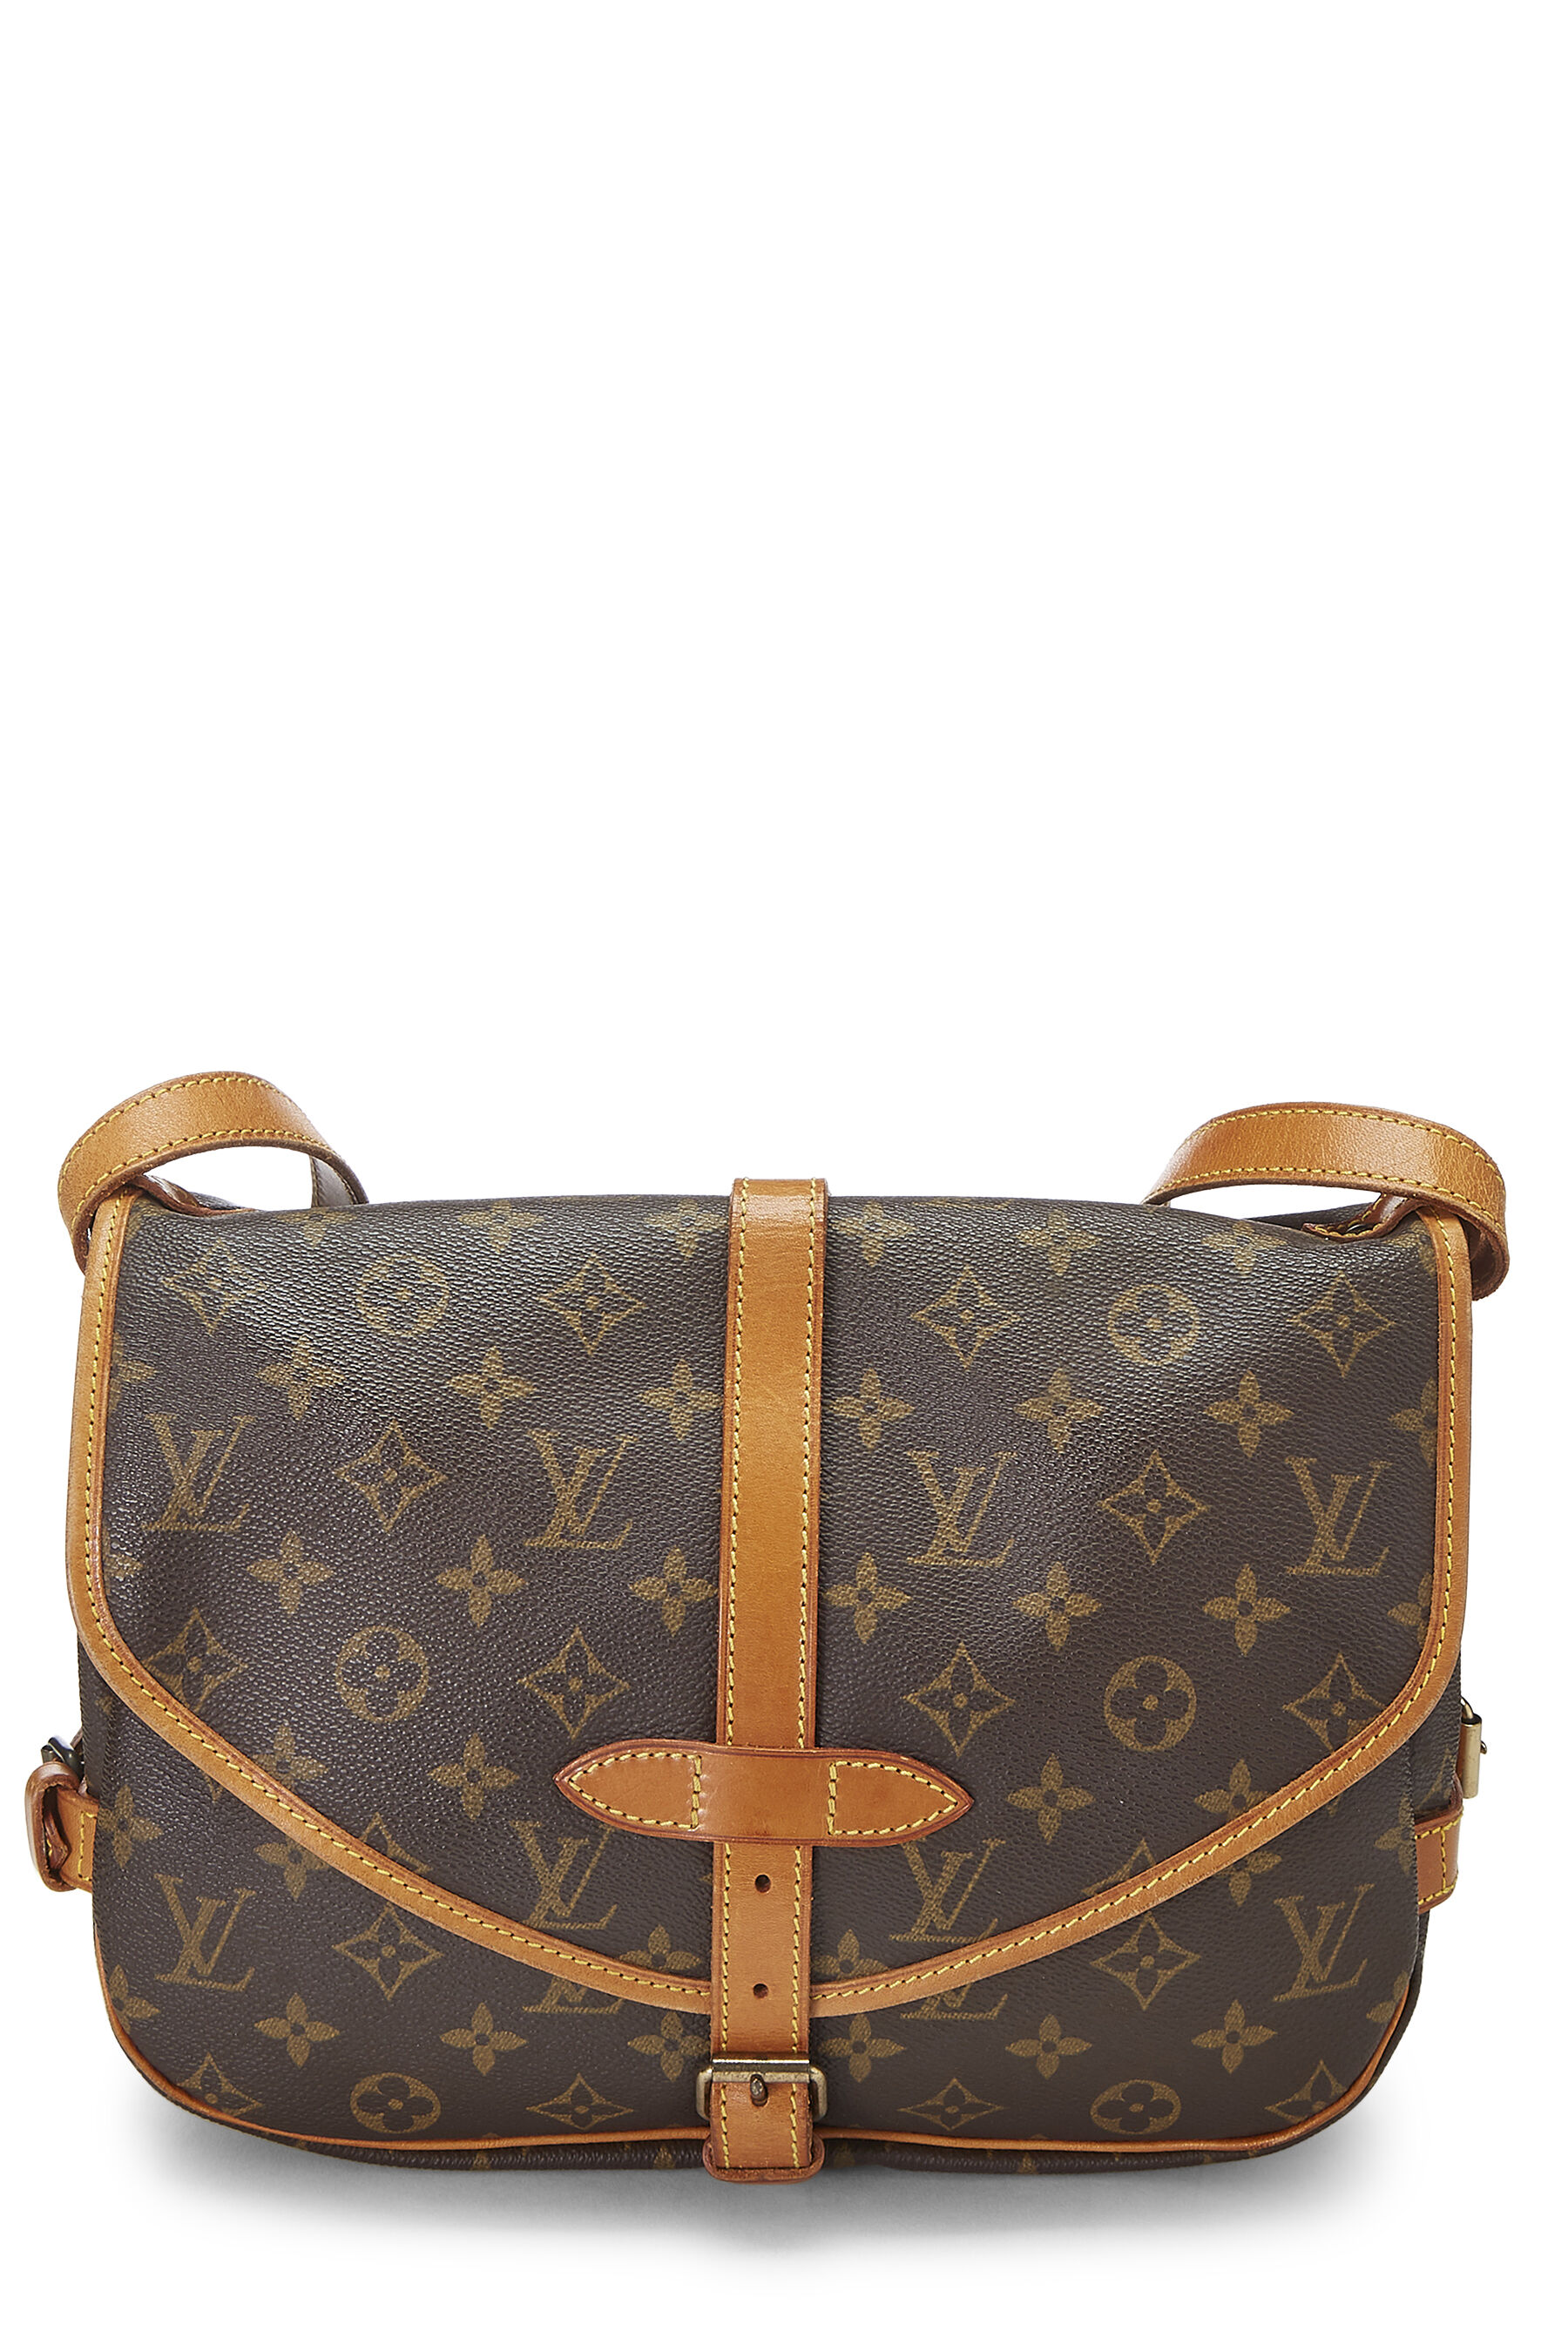 Louis Vuitton Limited Edition Perforated Saumur Monogram 30